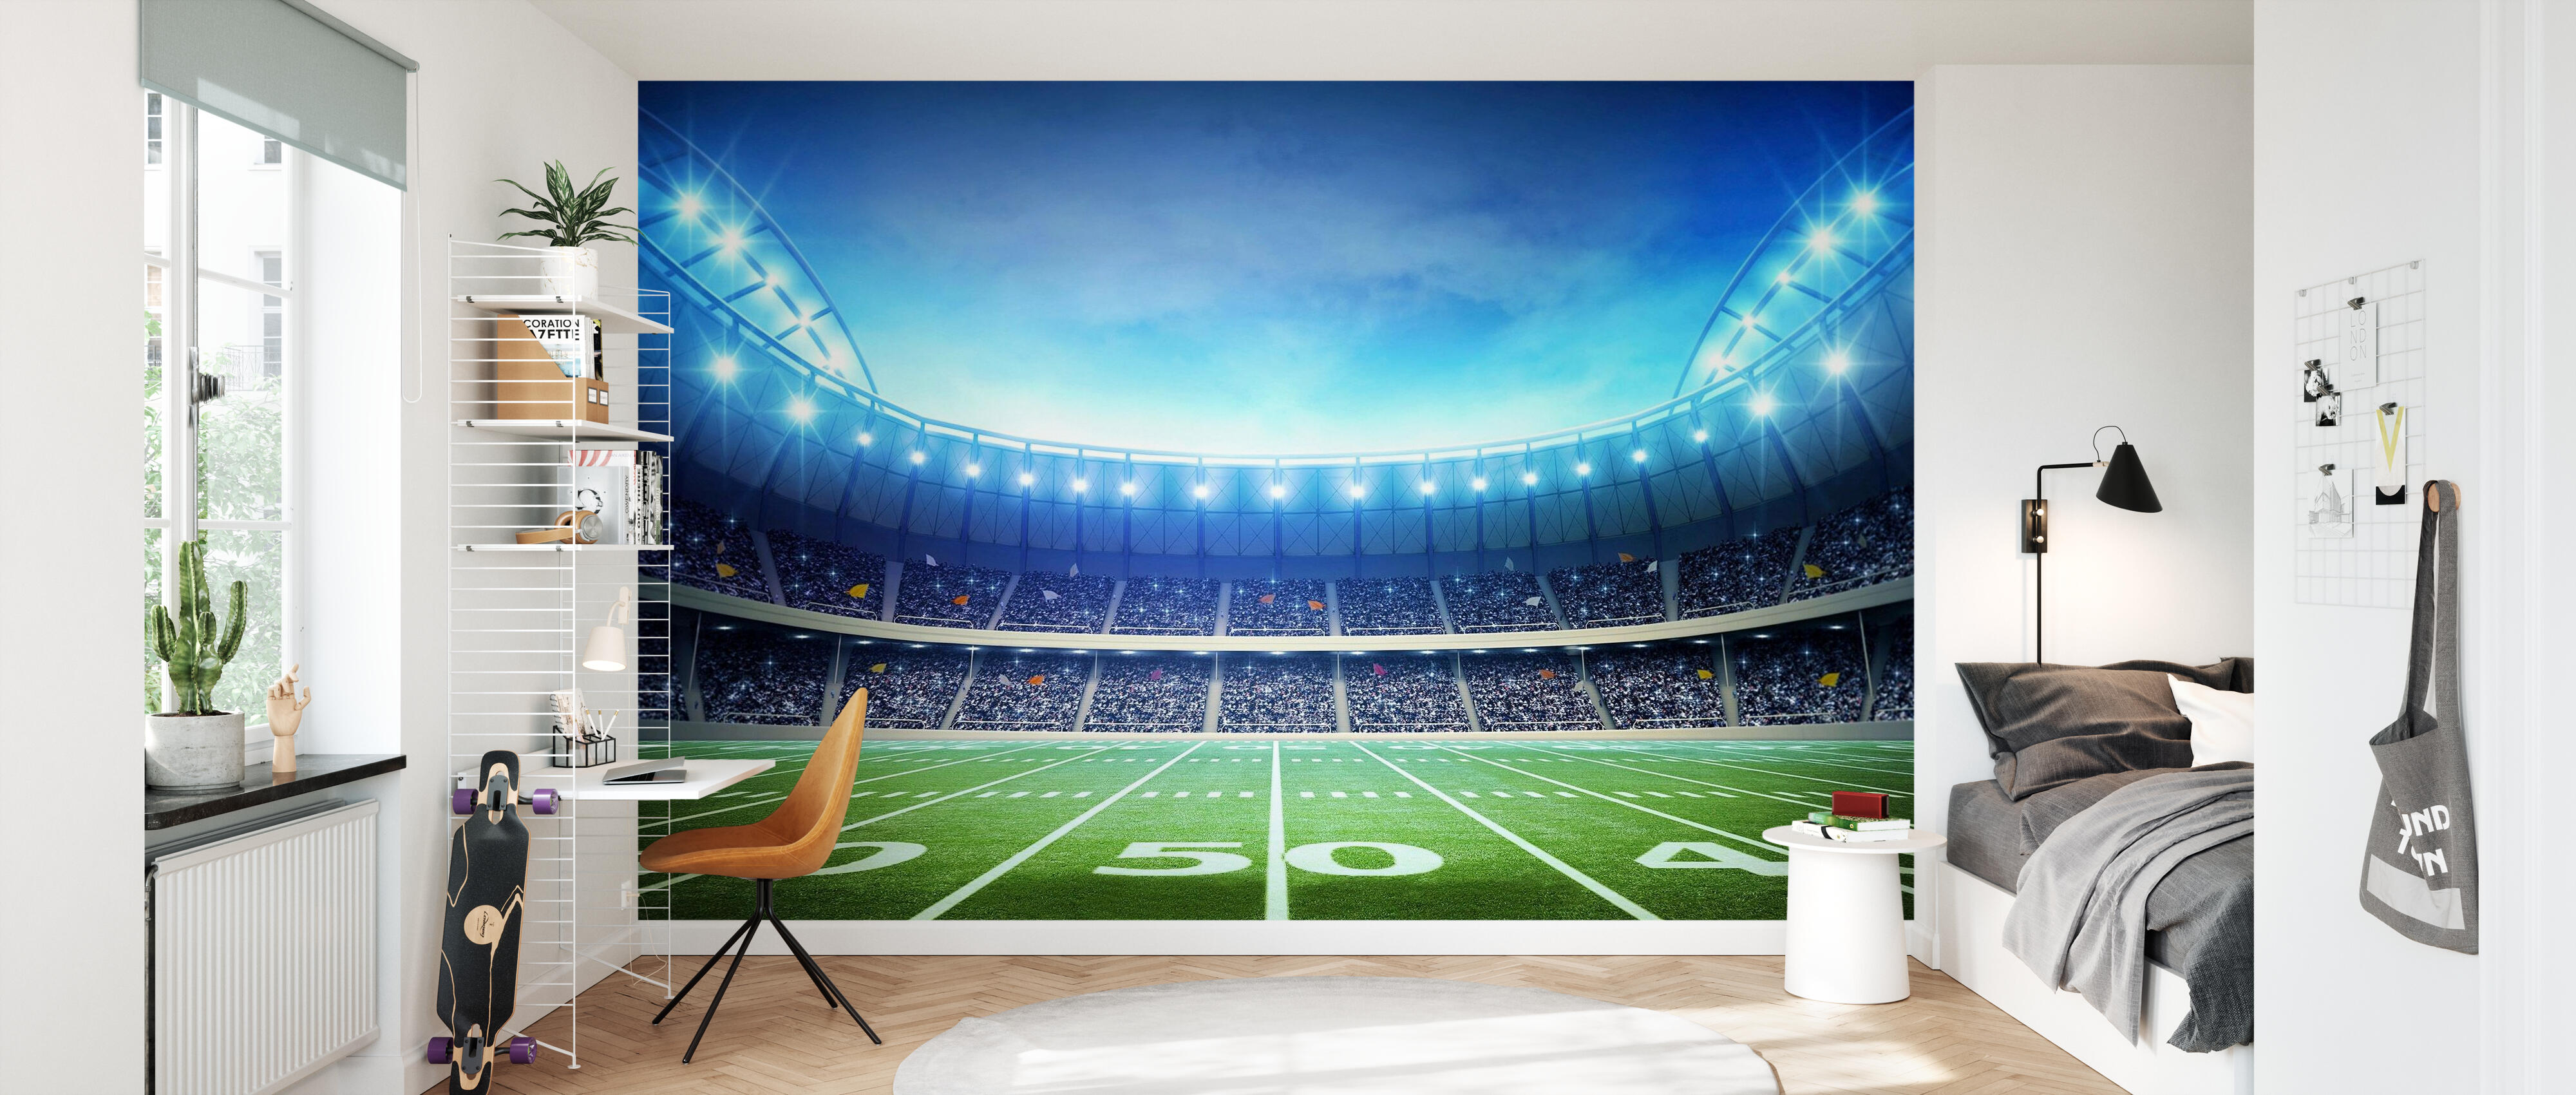 FOOTBALL STADE Wall Mural Photo Wallpapers for Boys Bedroom Field Kids Poster